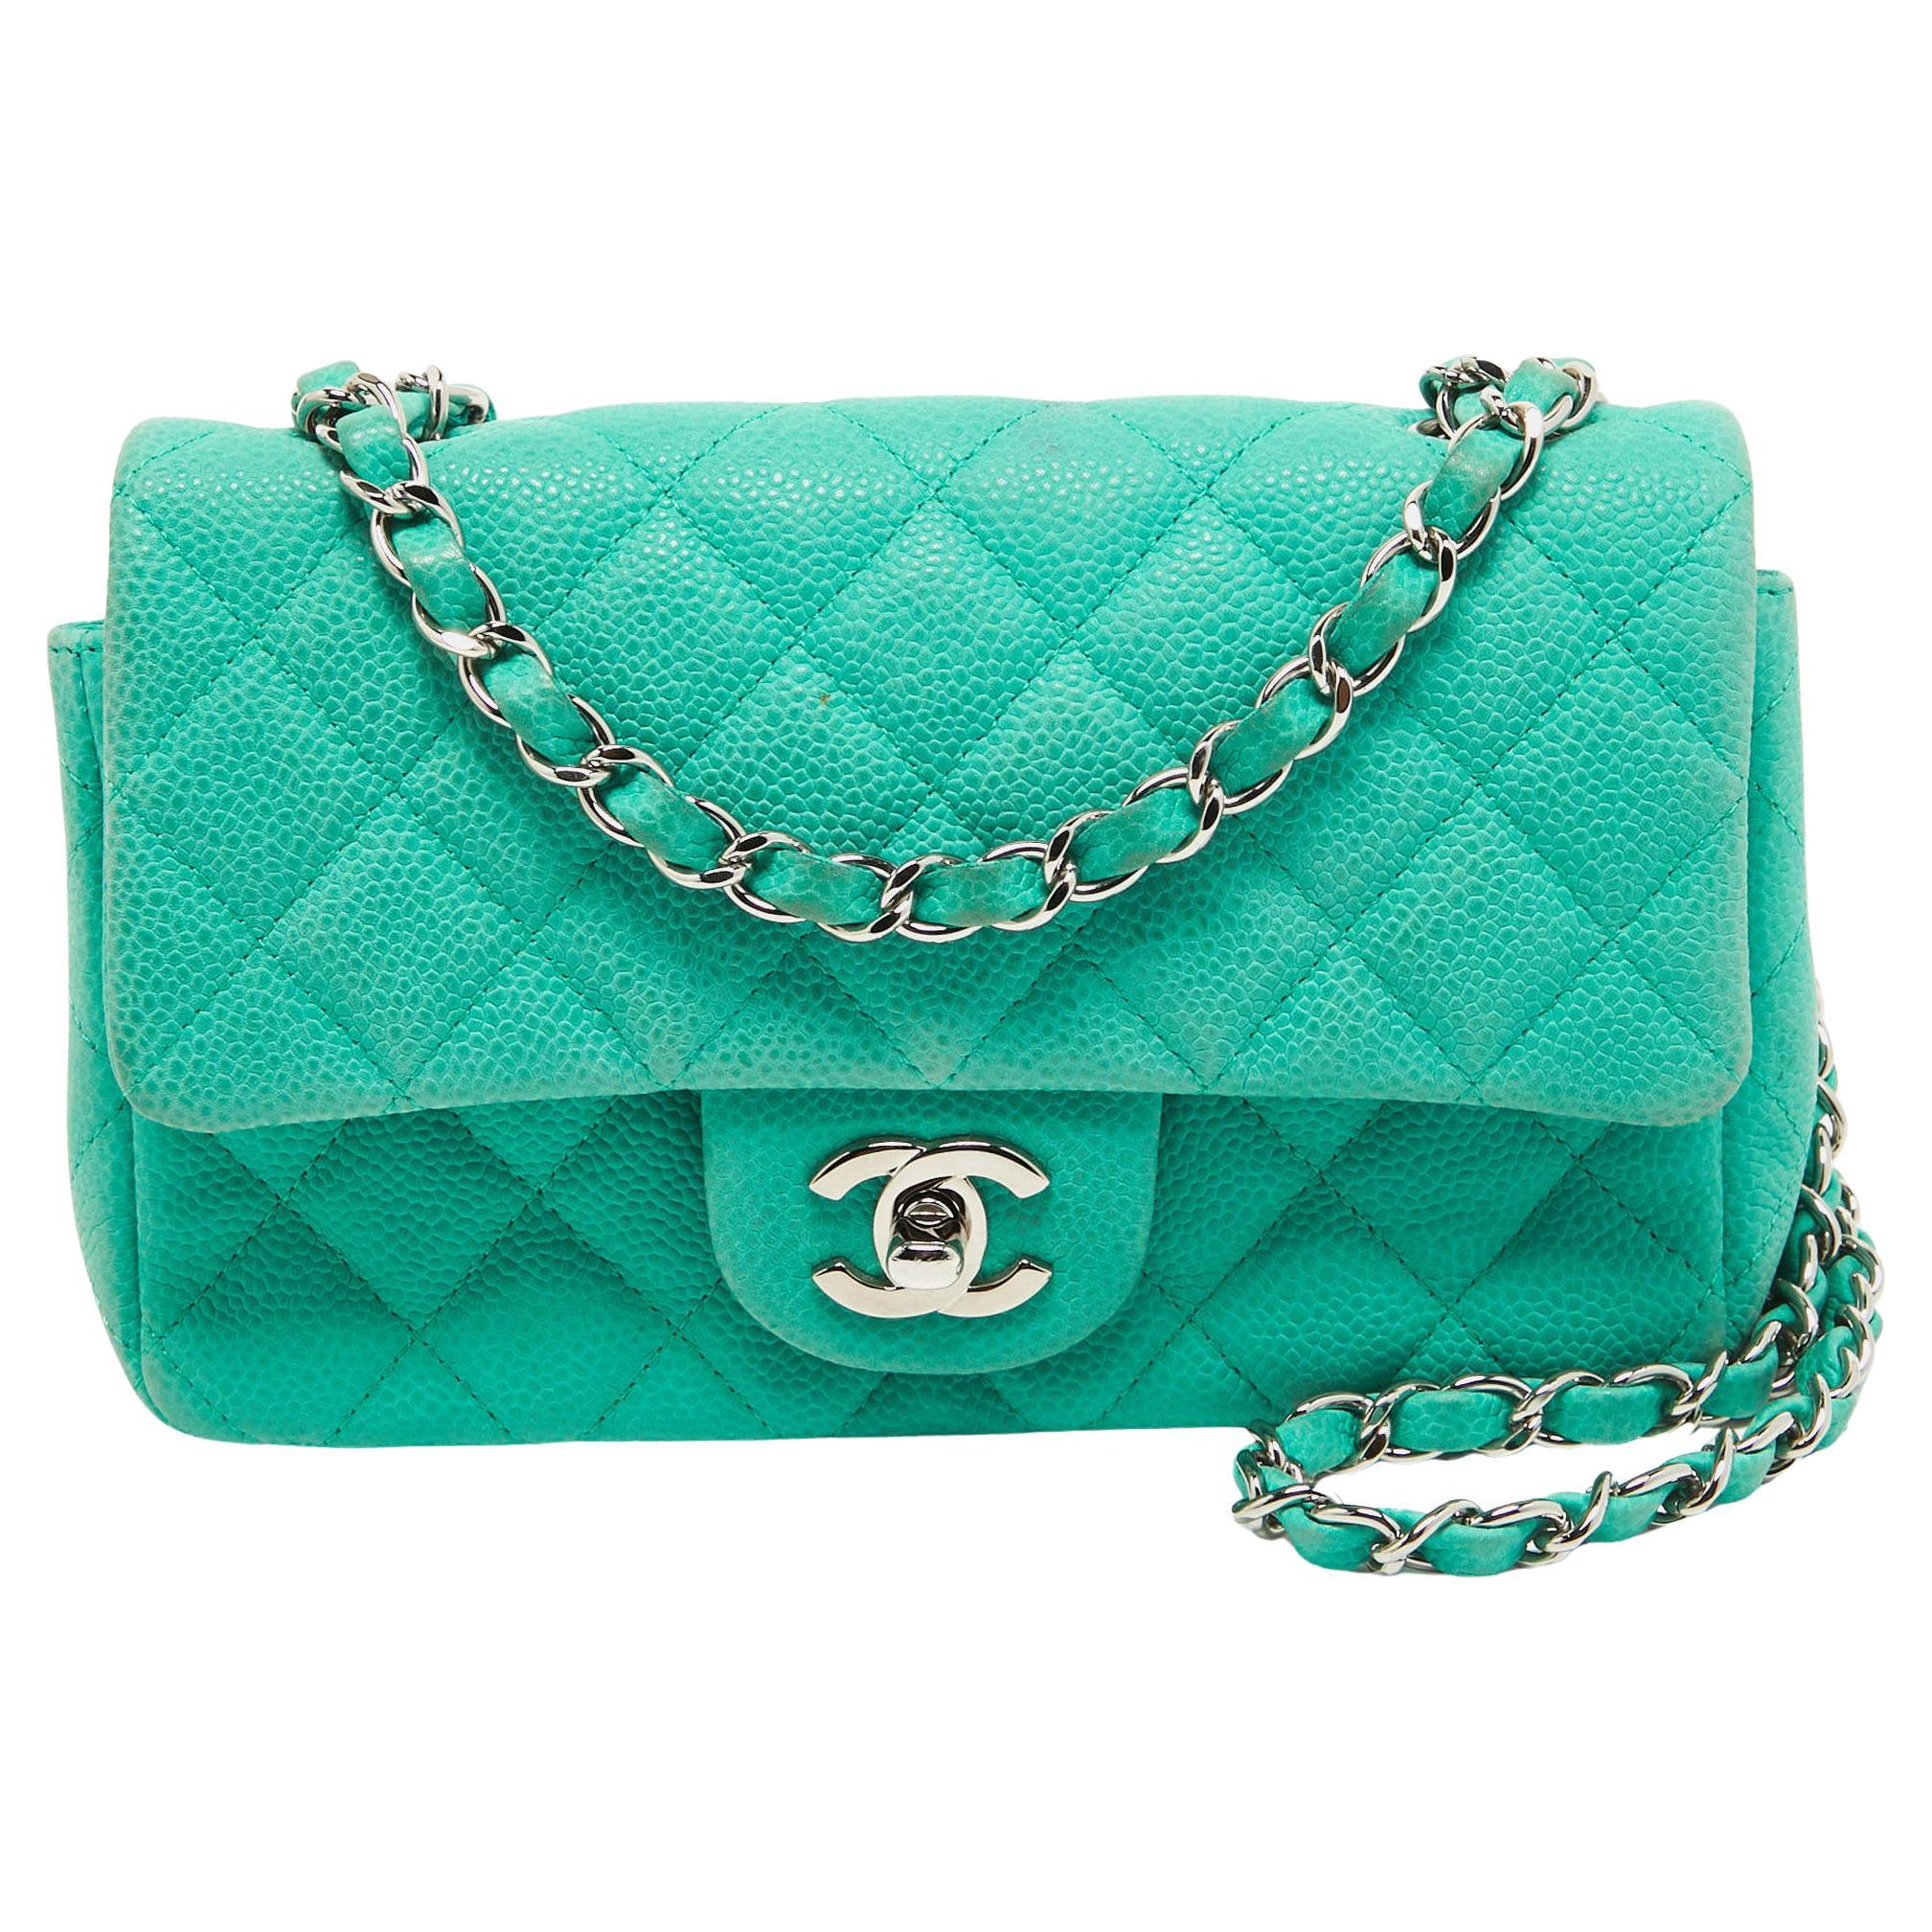 Chanel Green Quilted Caviar Leather New Mini Classic Flap Bag For Sale